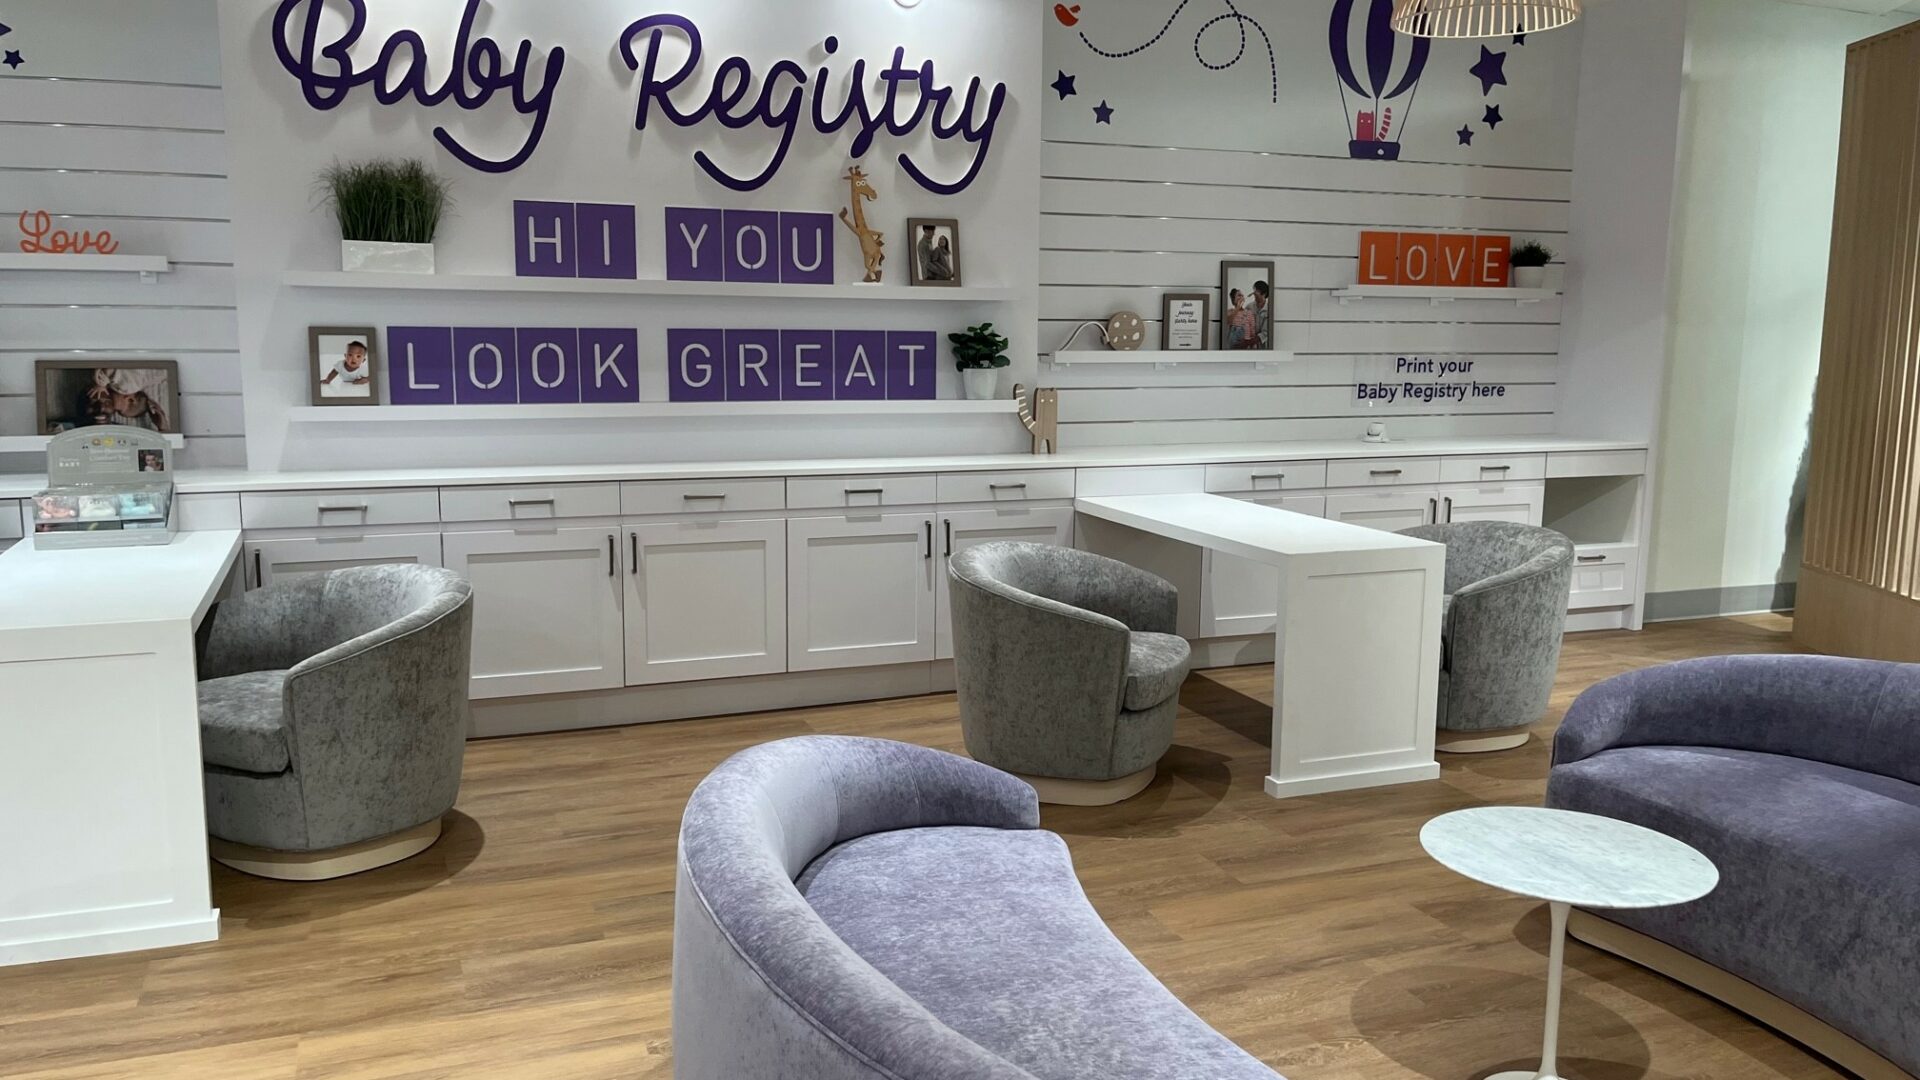 Baby Registry lounge area at front of store. (Photo Credit: Retail TouchPoints)